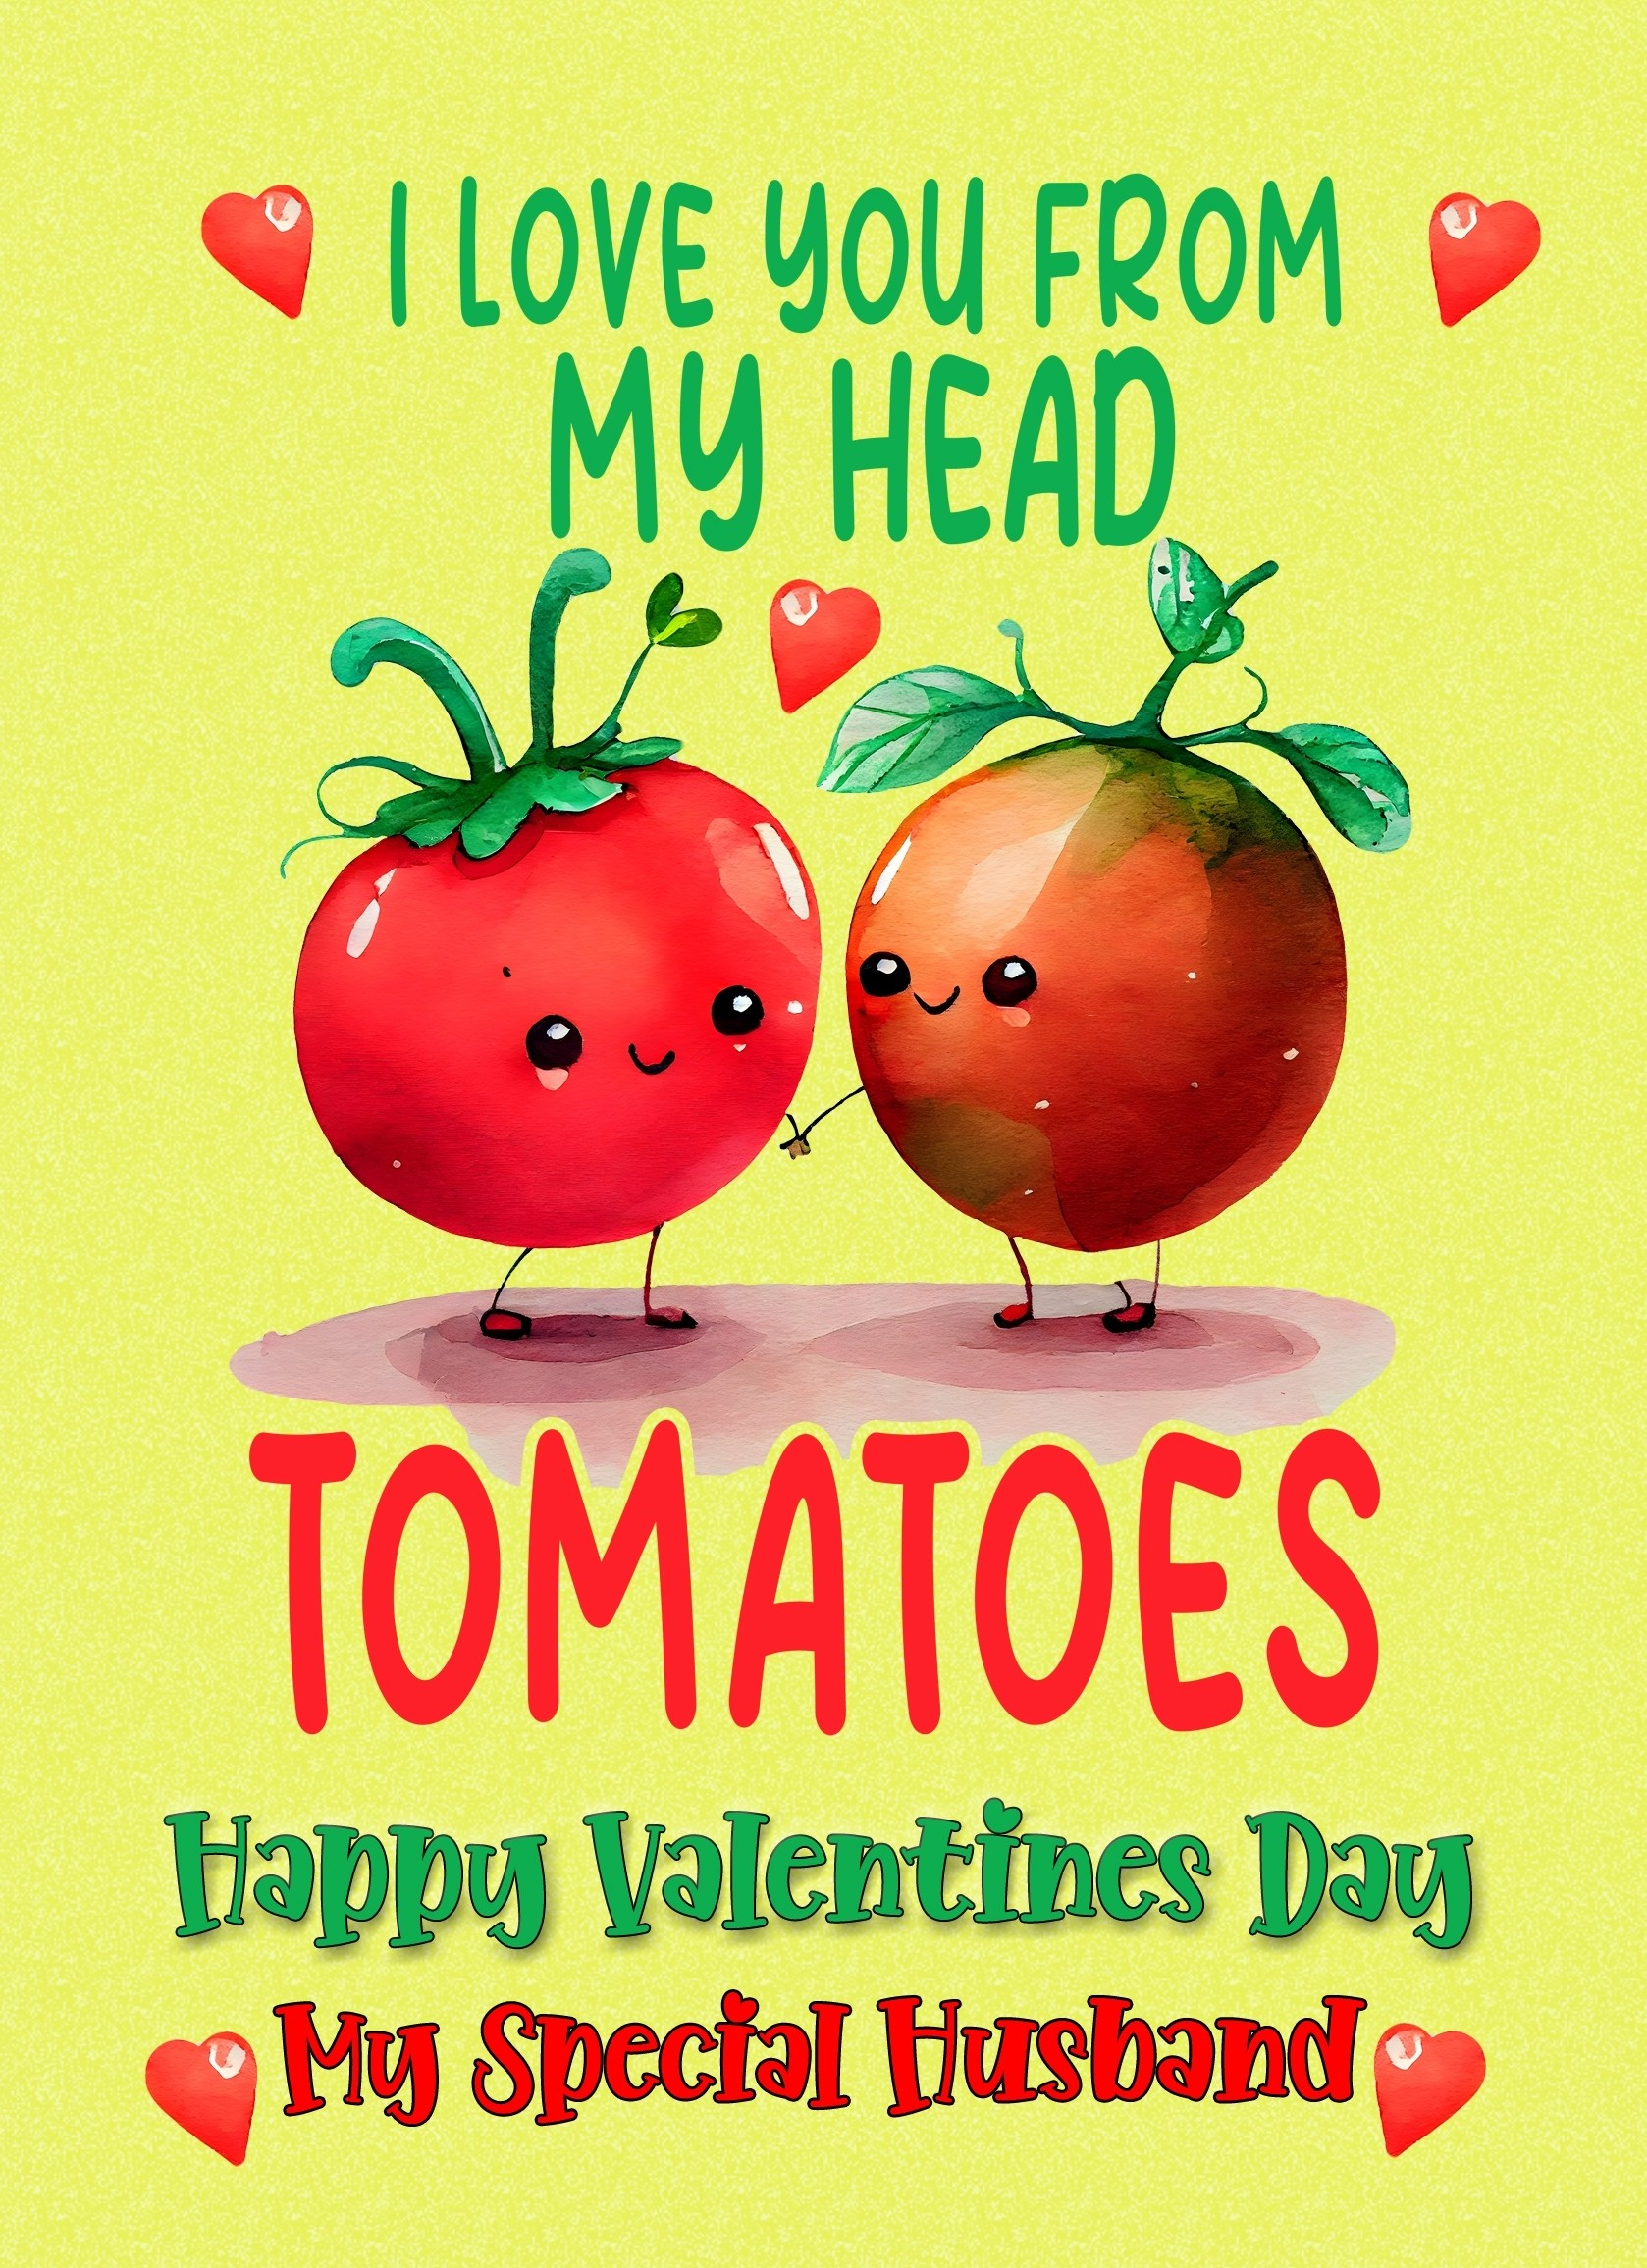 Funny Pun Valentines Day Card for Husband (Tomatoes)